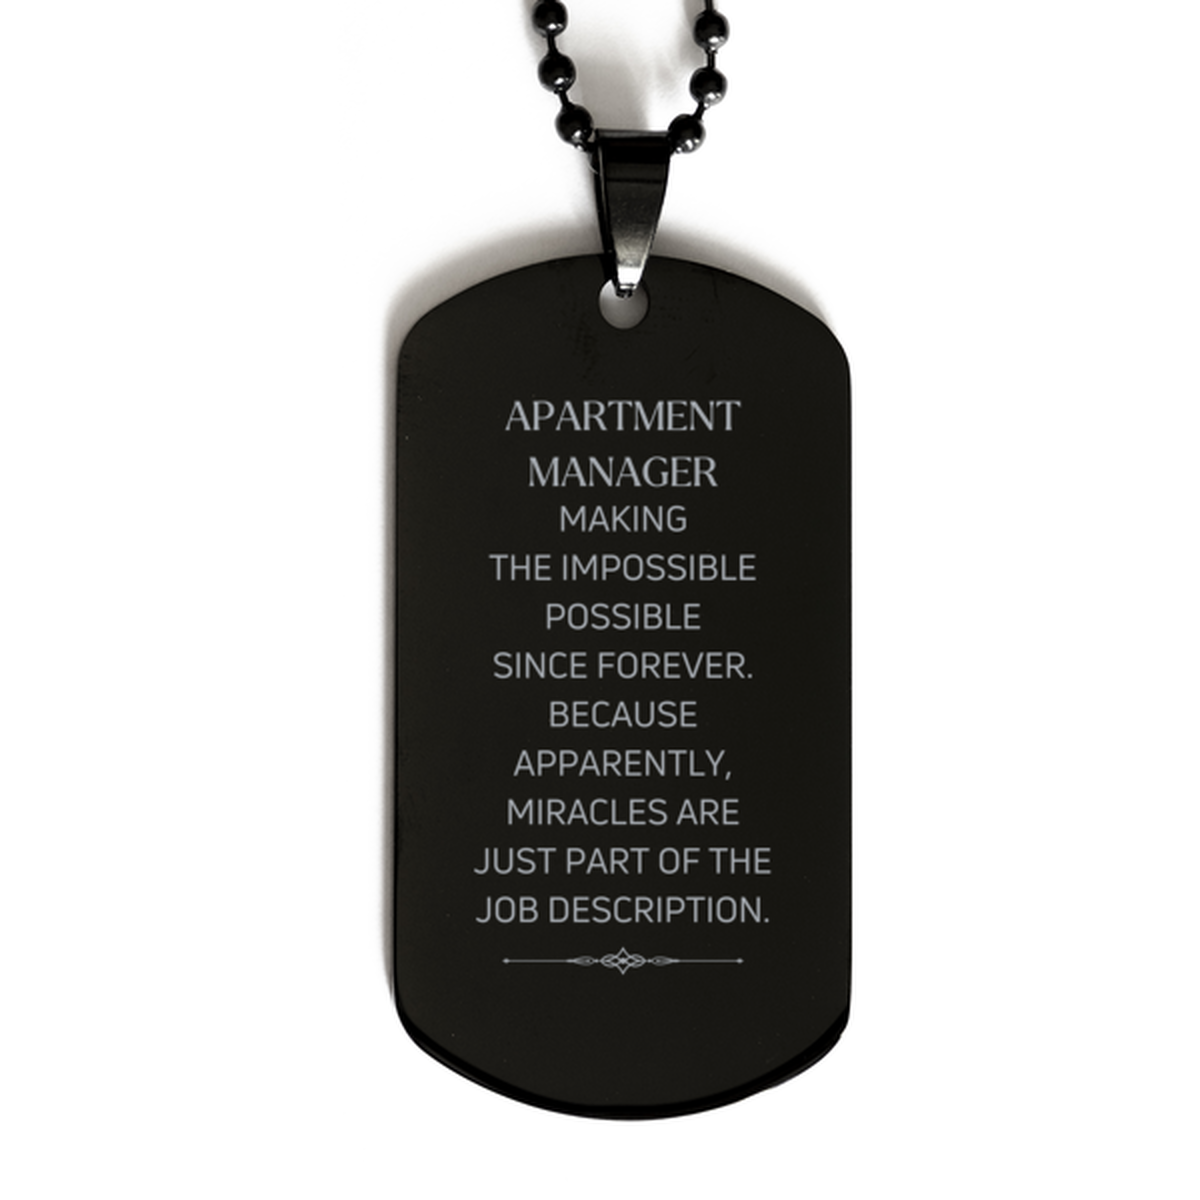 Funny Apartment Manager Gifts, Miracles are just part of the job description, Inspirational Birthday Black Dog Tag For Apartment Manager, Men, Women, Coworkers, Friends, Boss